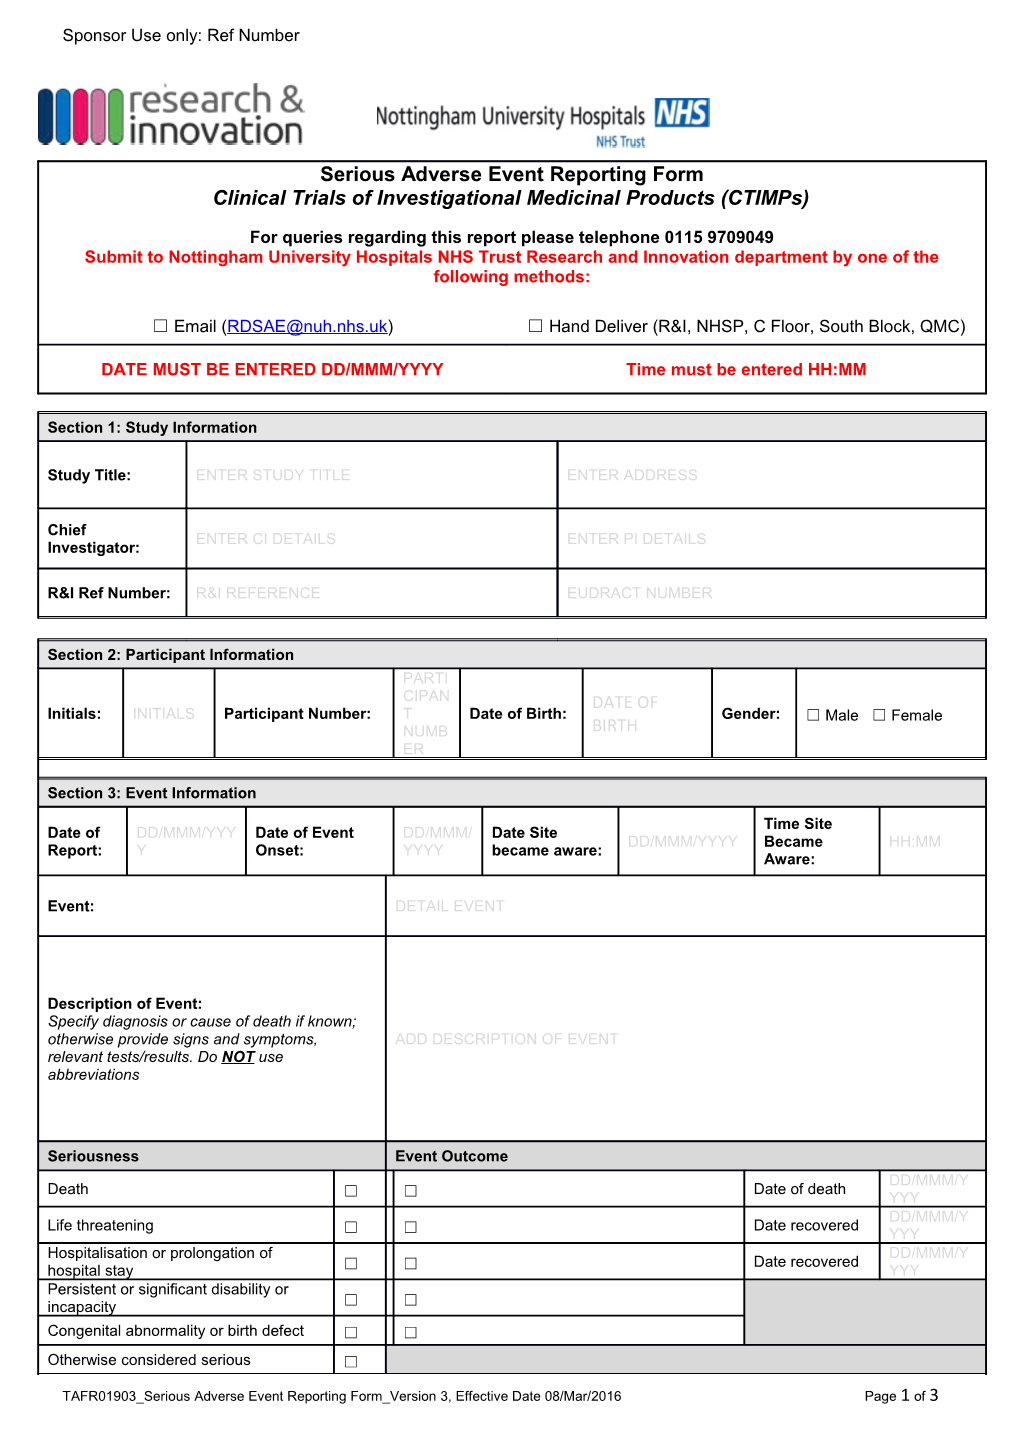 TAFR01903 Serious Adverse Event Reporting Form Version 3, Effective Date 08/Mar/2016Page 1 of 3